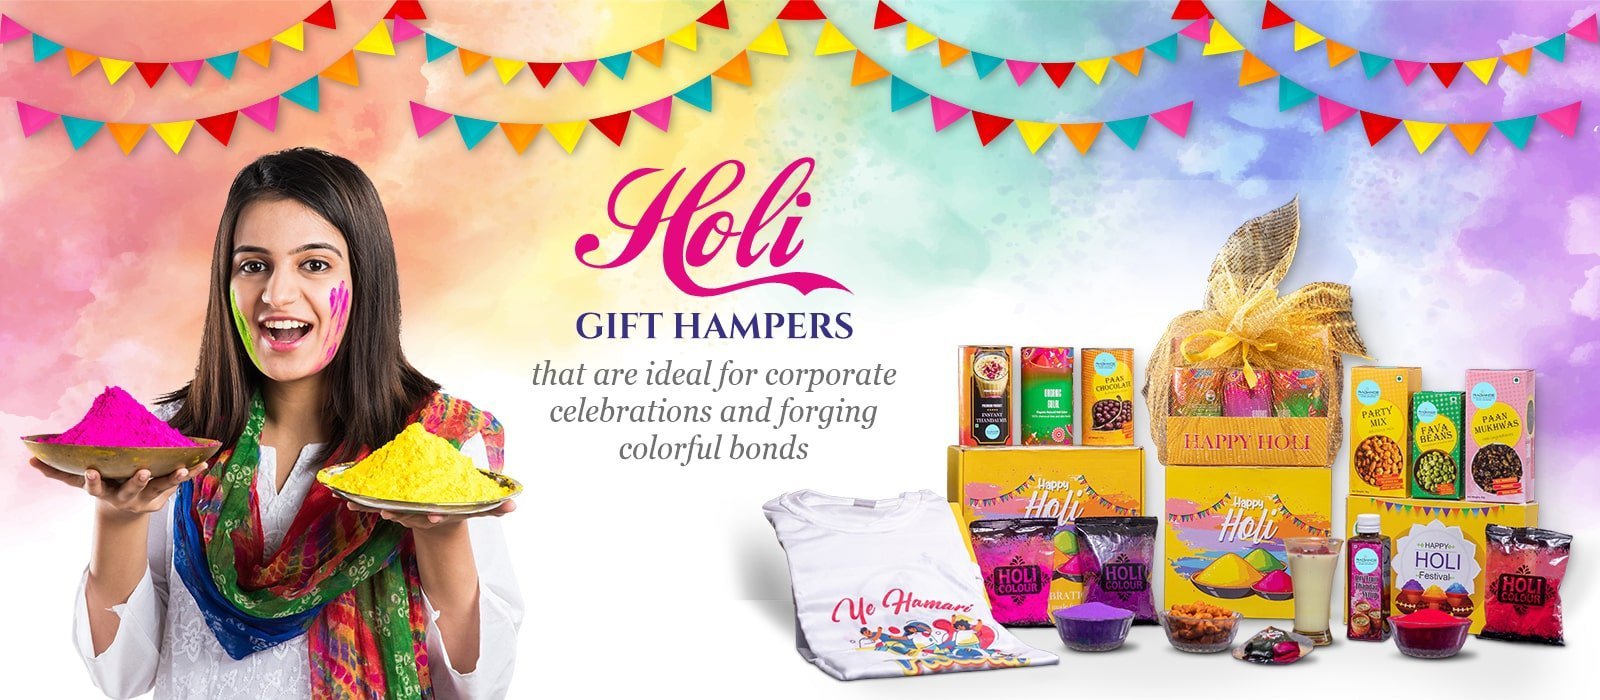 Expelite Holi Gifts Chocolate | Happy Holi Chocolate Box, Holi Special  Celebration Gift Hamper (450 g) : Amazon.in: Grocery & Gourmet Foods